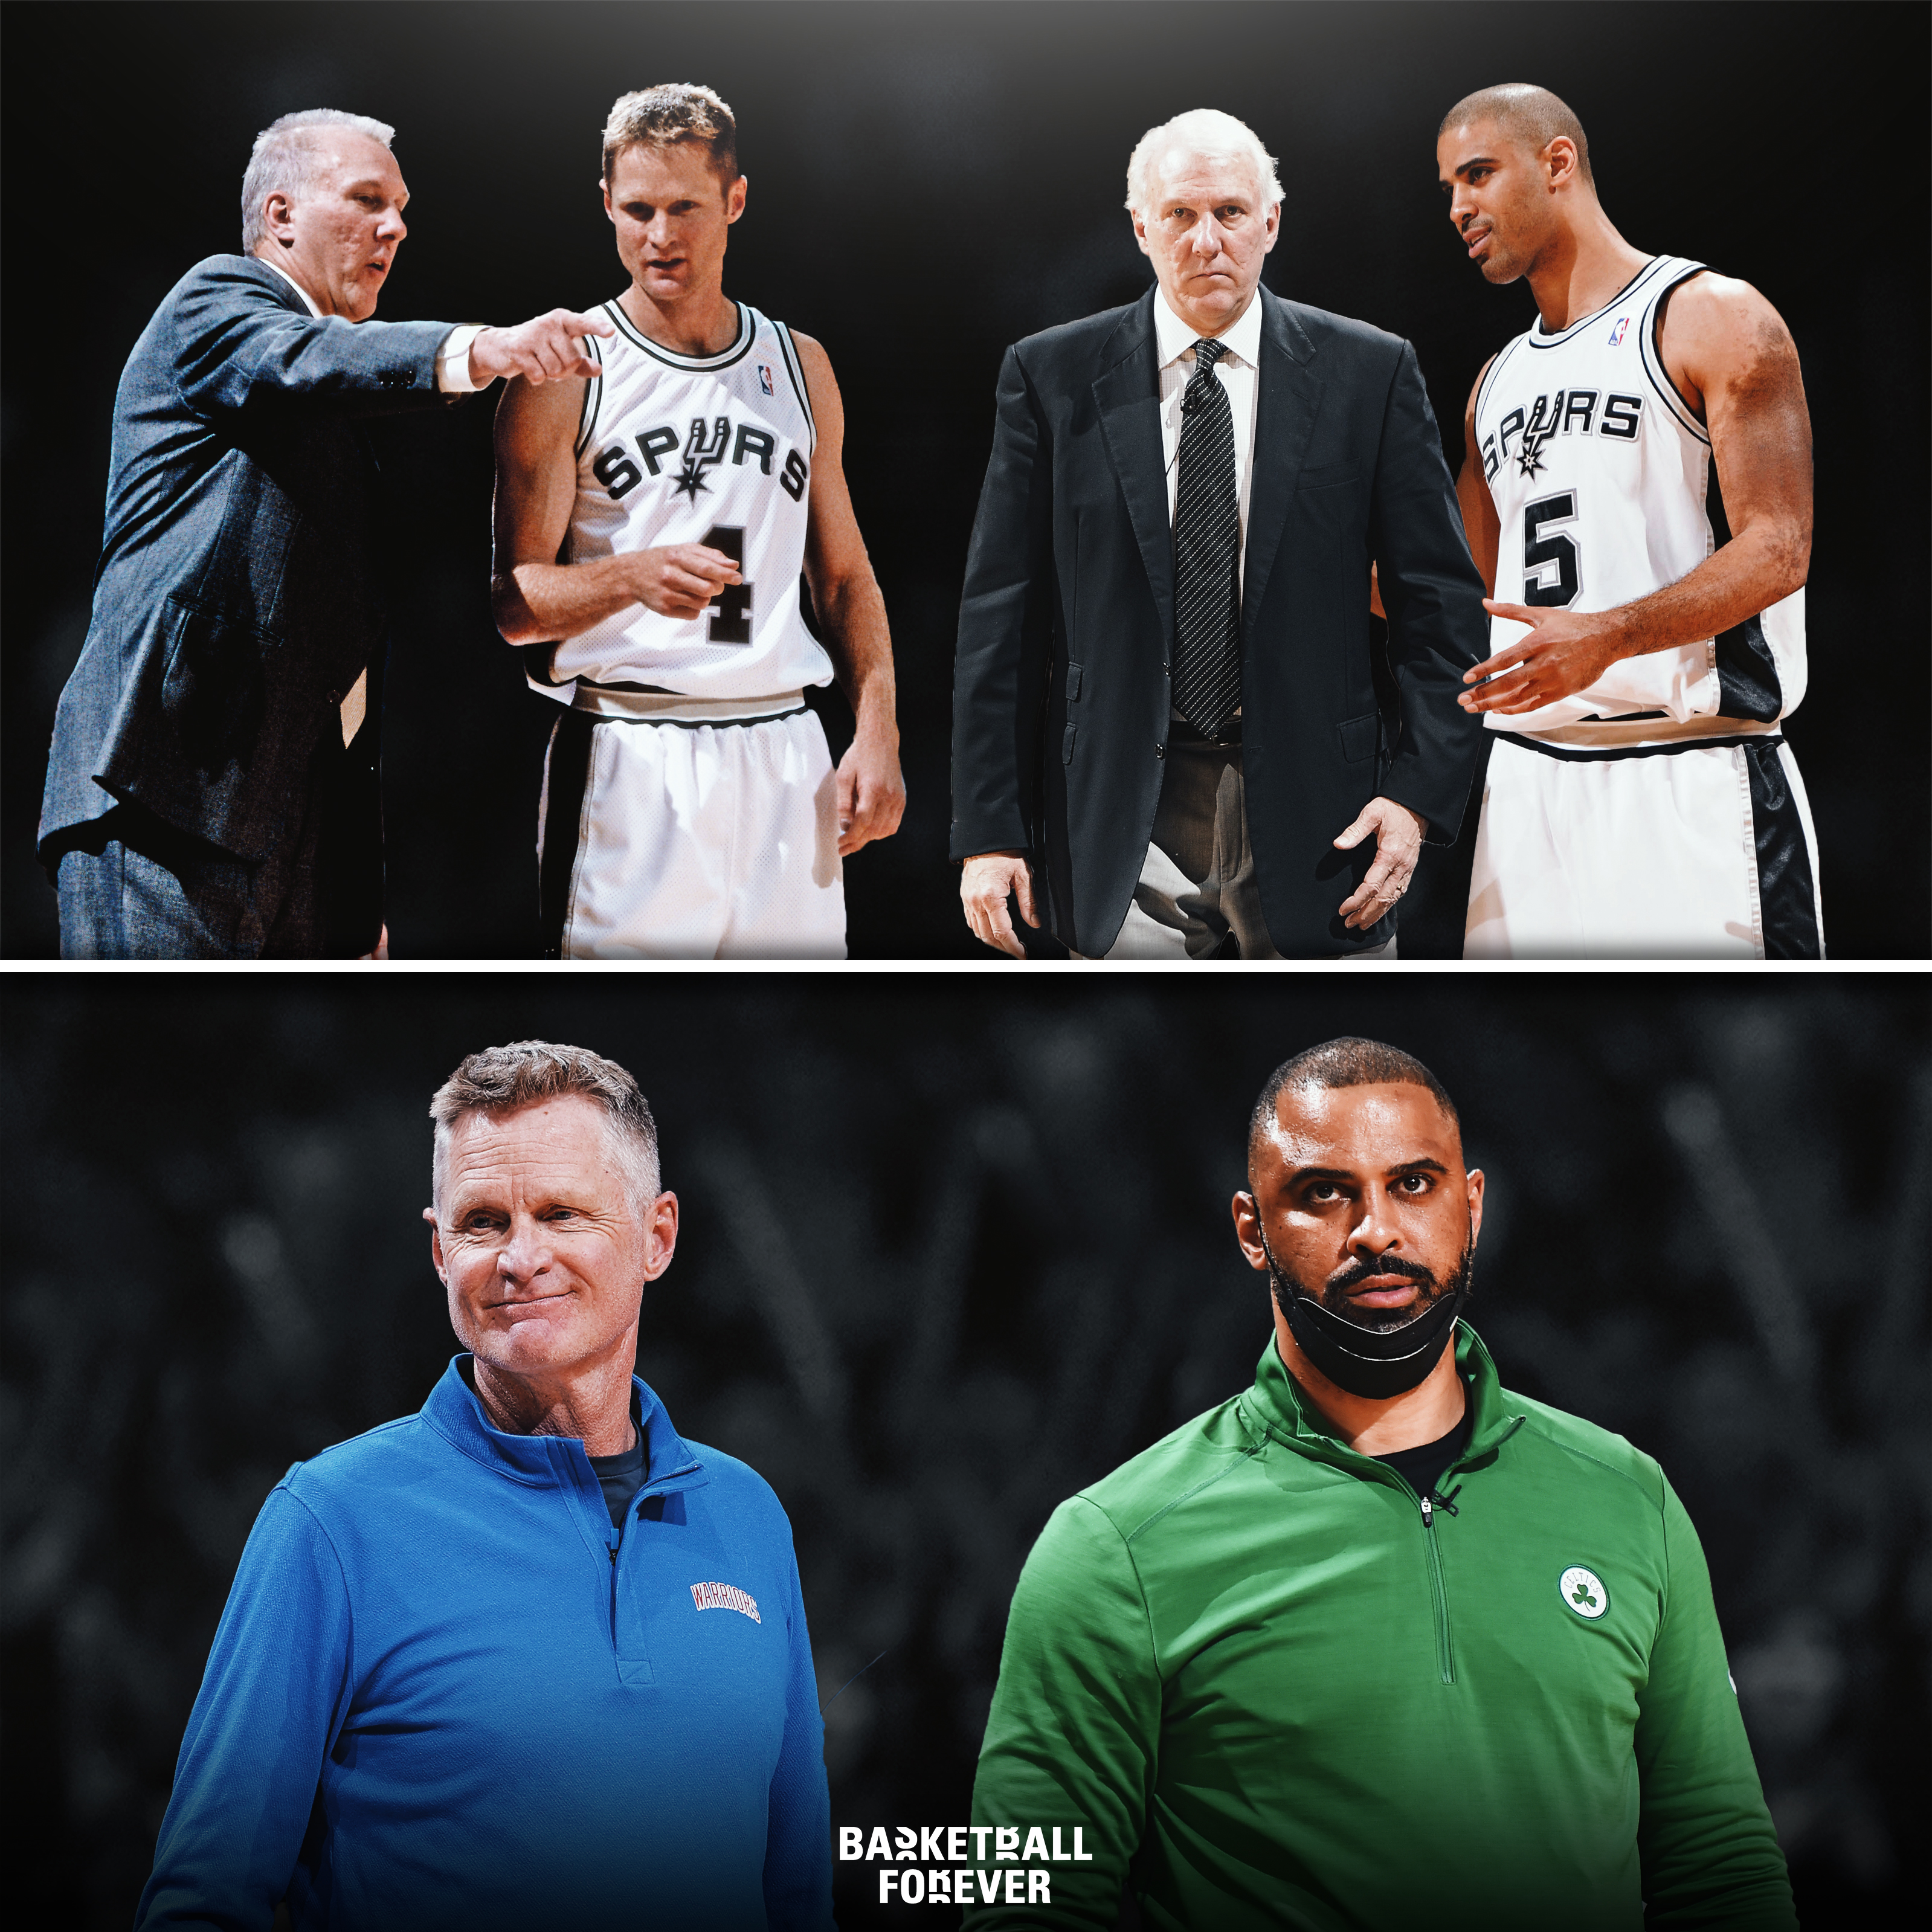 Basketball Forever on X: Both Steve Kerr and Ime Udoka are former